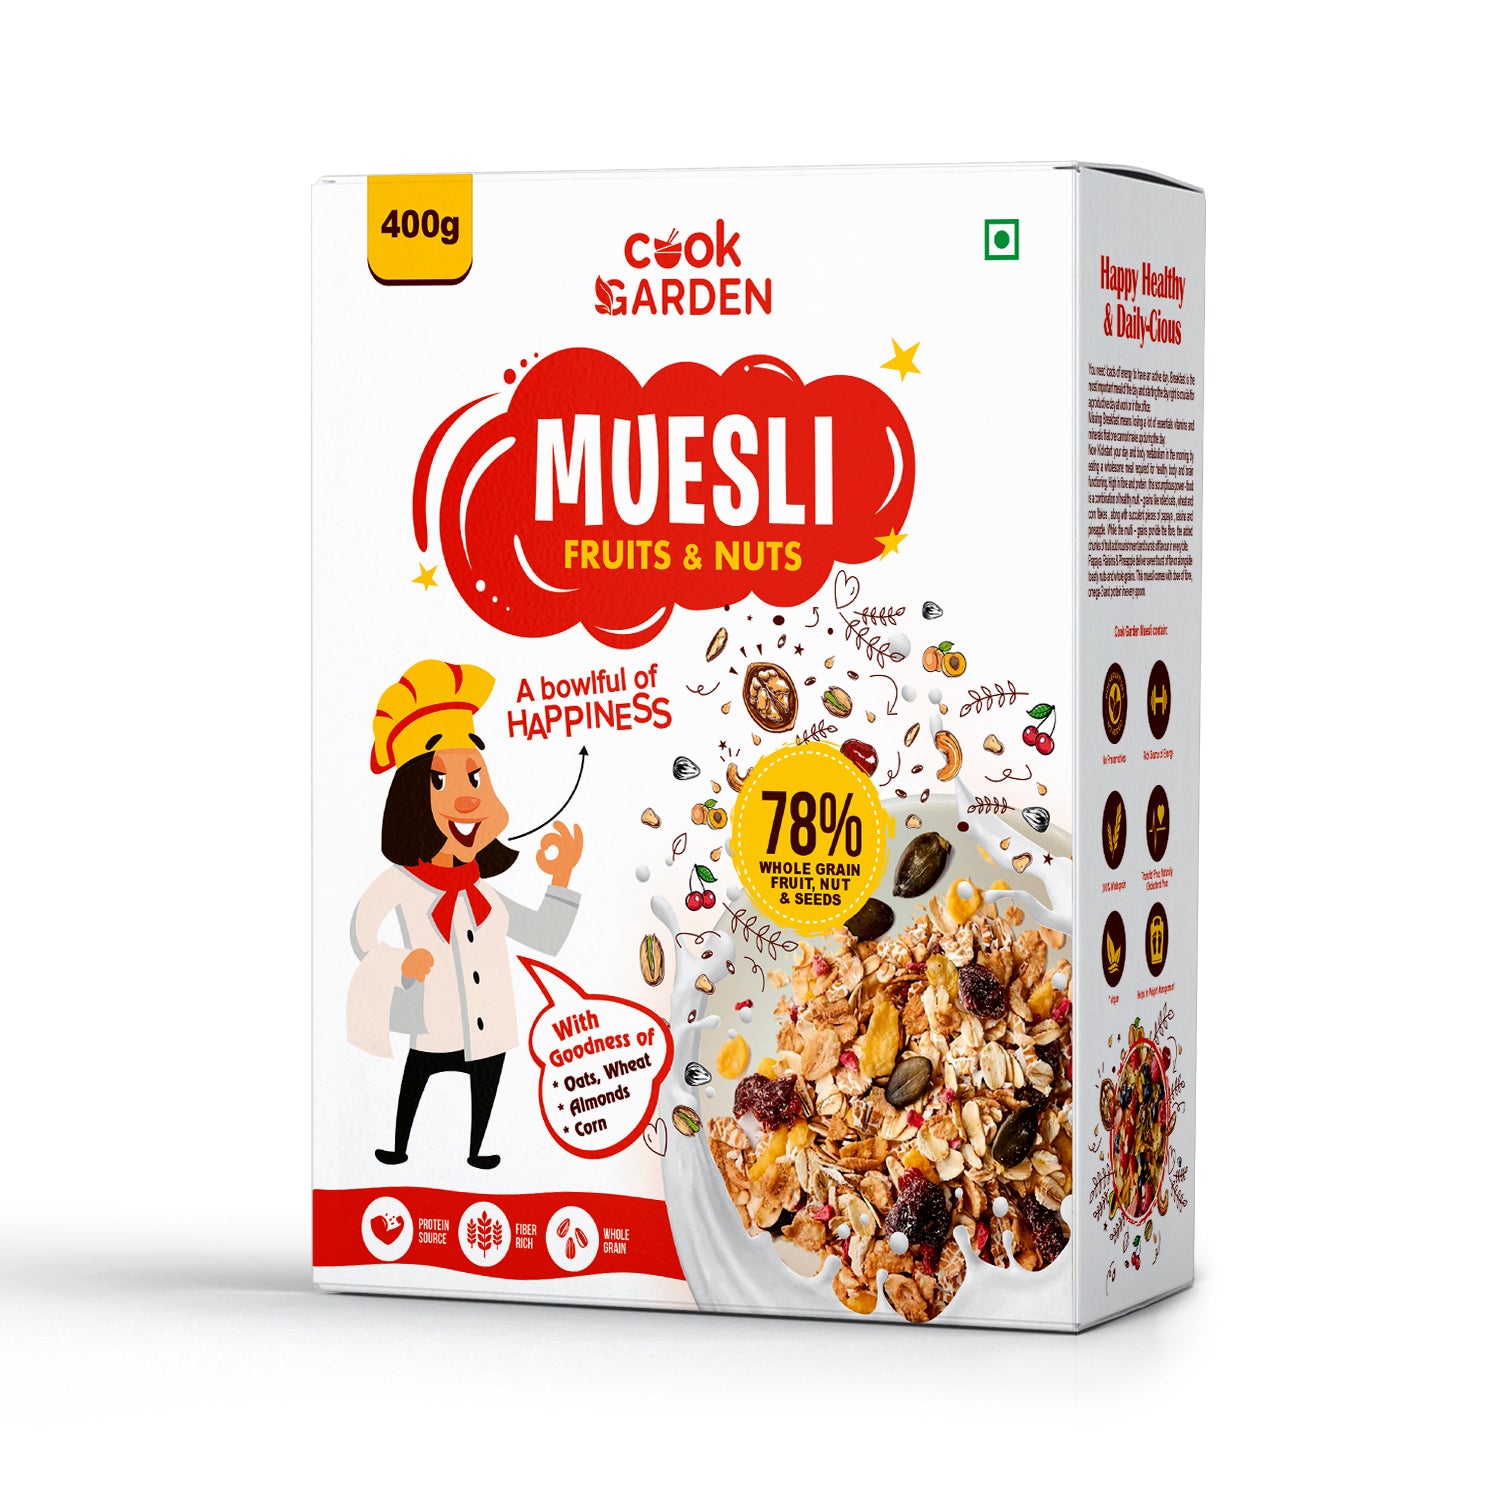 Muesli Fruits, Nuts with Pumpkin seeds 400g | Whole grain, High Protein, High Fibre | No chemical, Omega rich | Wholegrain Breakfast